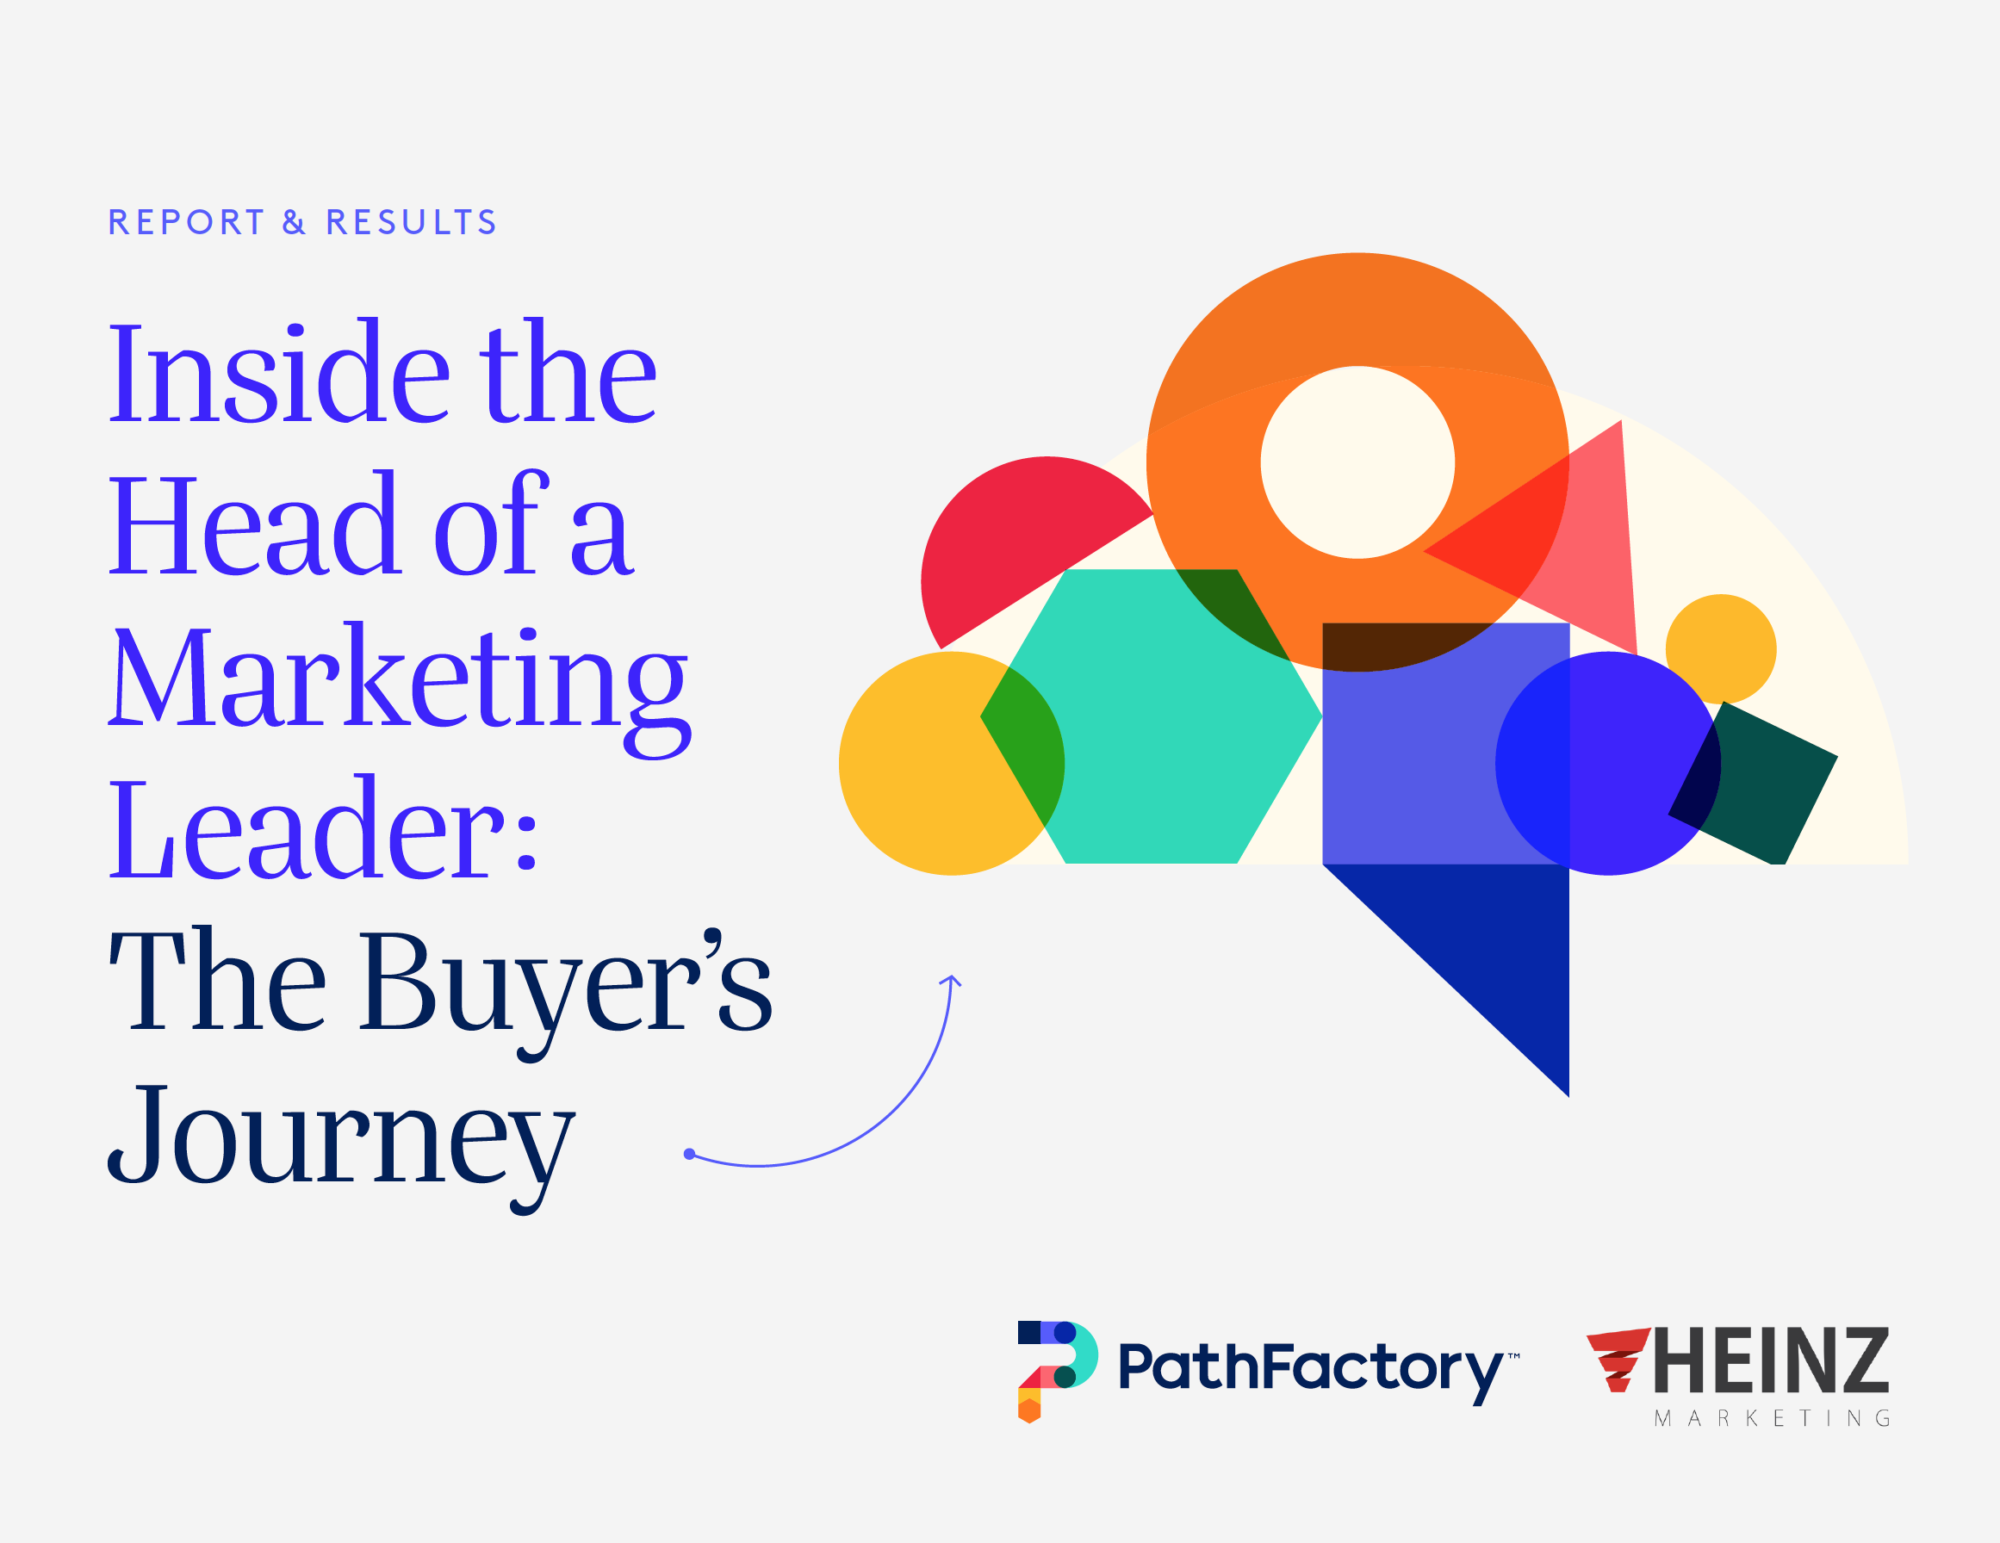 Inside the Head of a Marketing Leader:  The Buyer's Journey, with geometric shapes on a grey background, with a PathFactory and Heinz Marketing logo on the bottom right